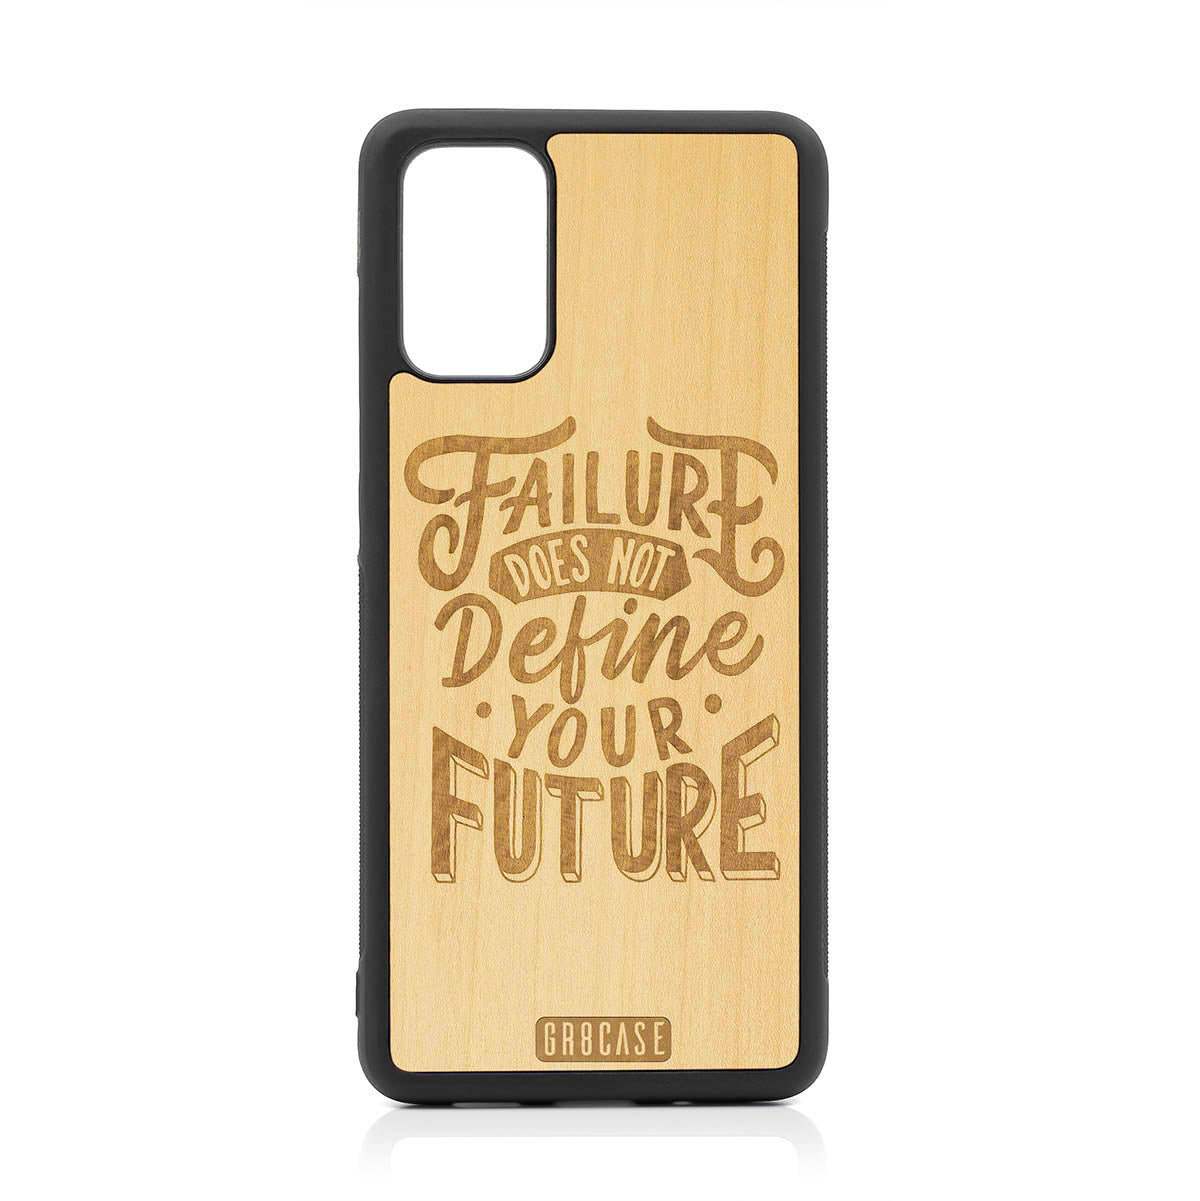 Failure Does Not Define You Future Design Wood Case For Samsung Galaxy S20 Plus by GR8CASE